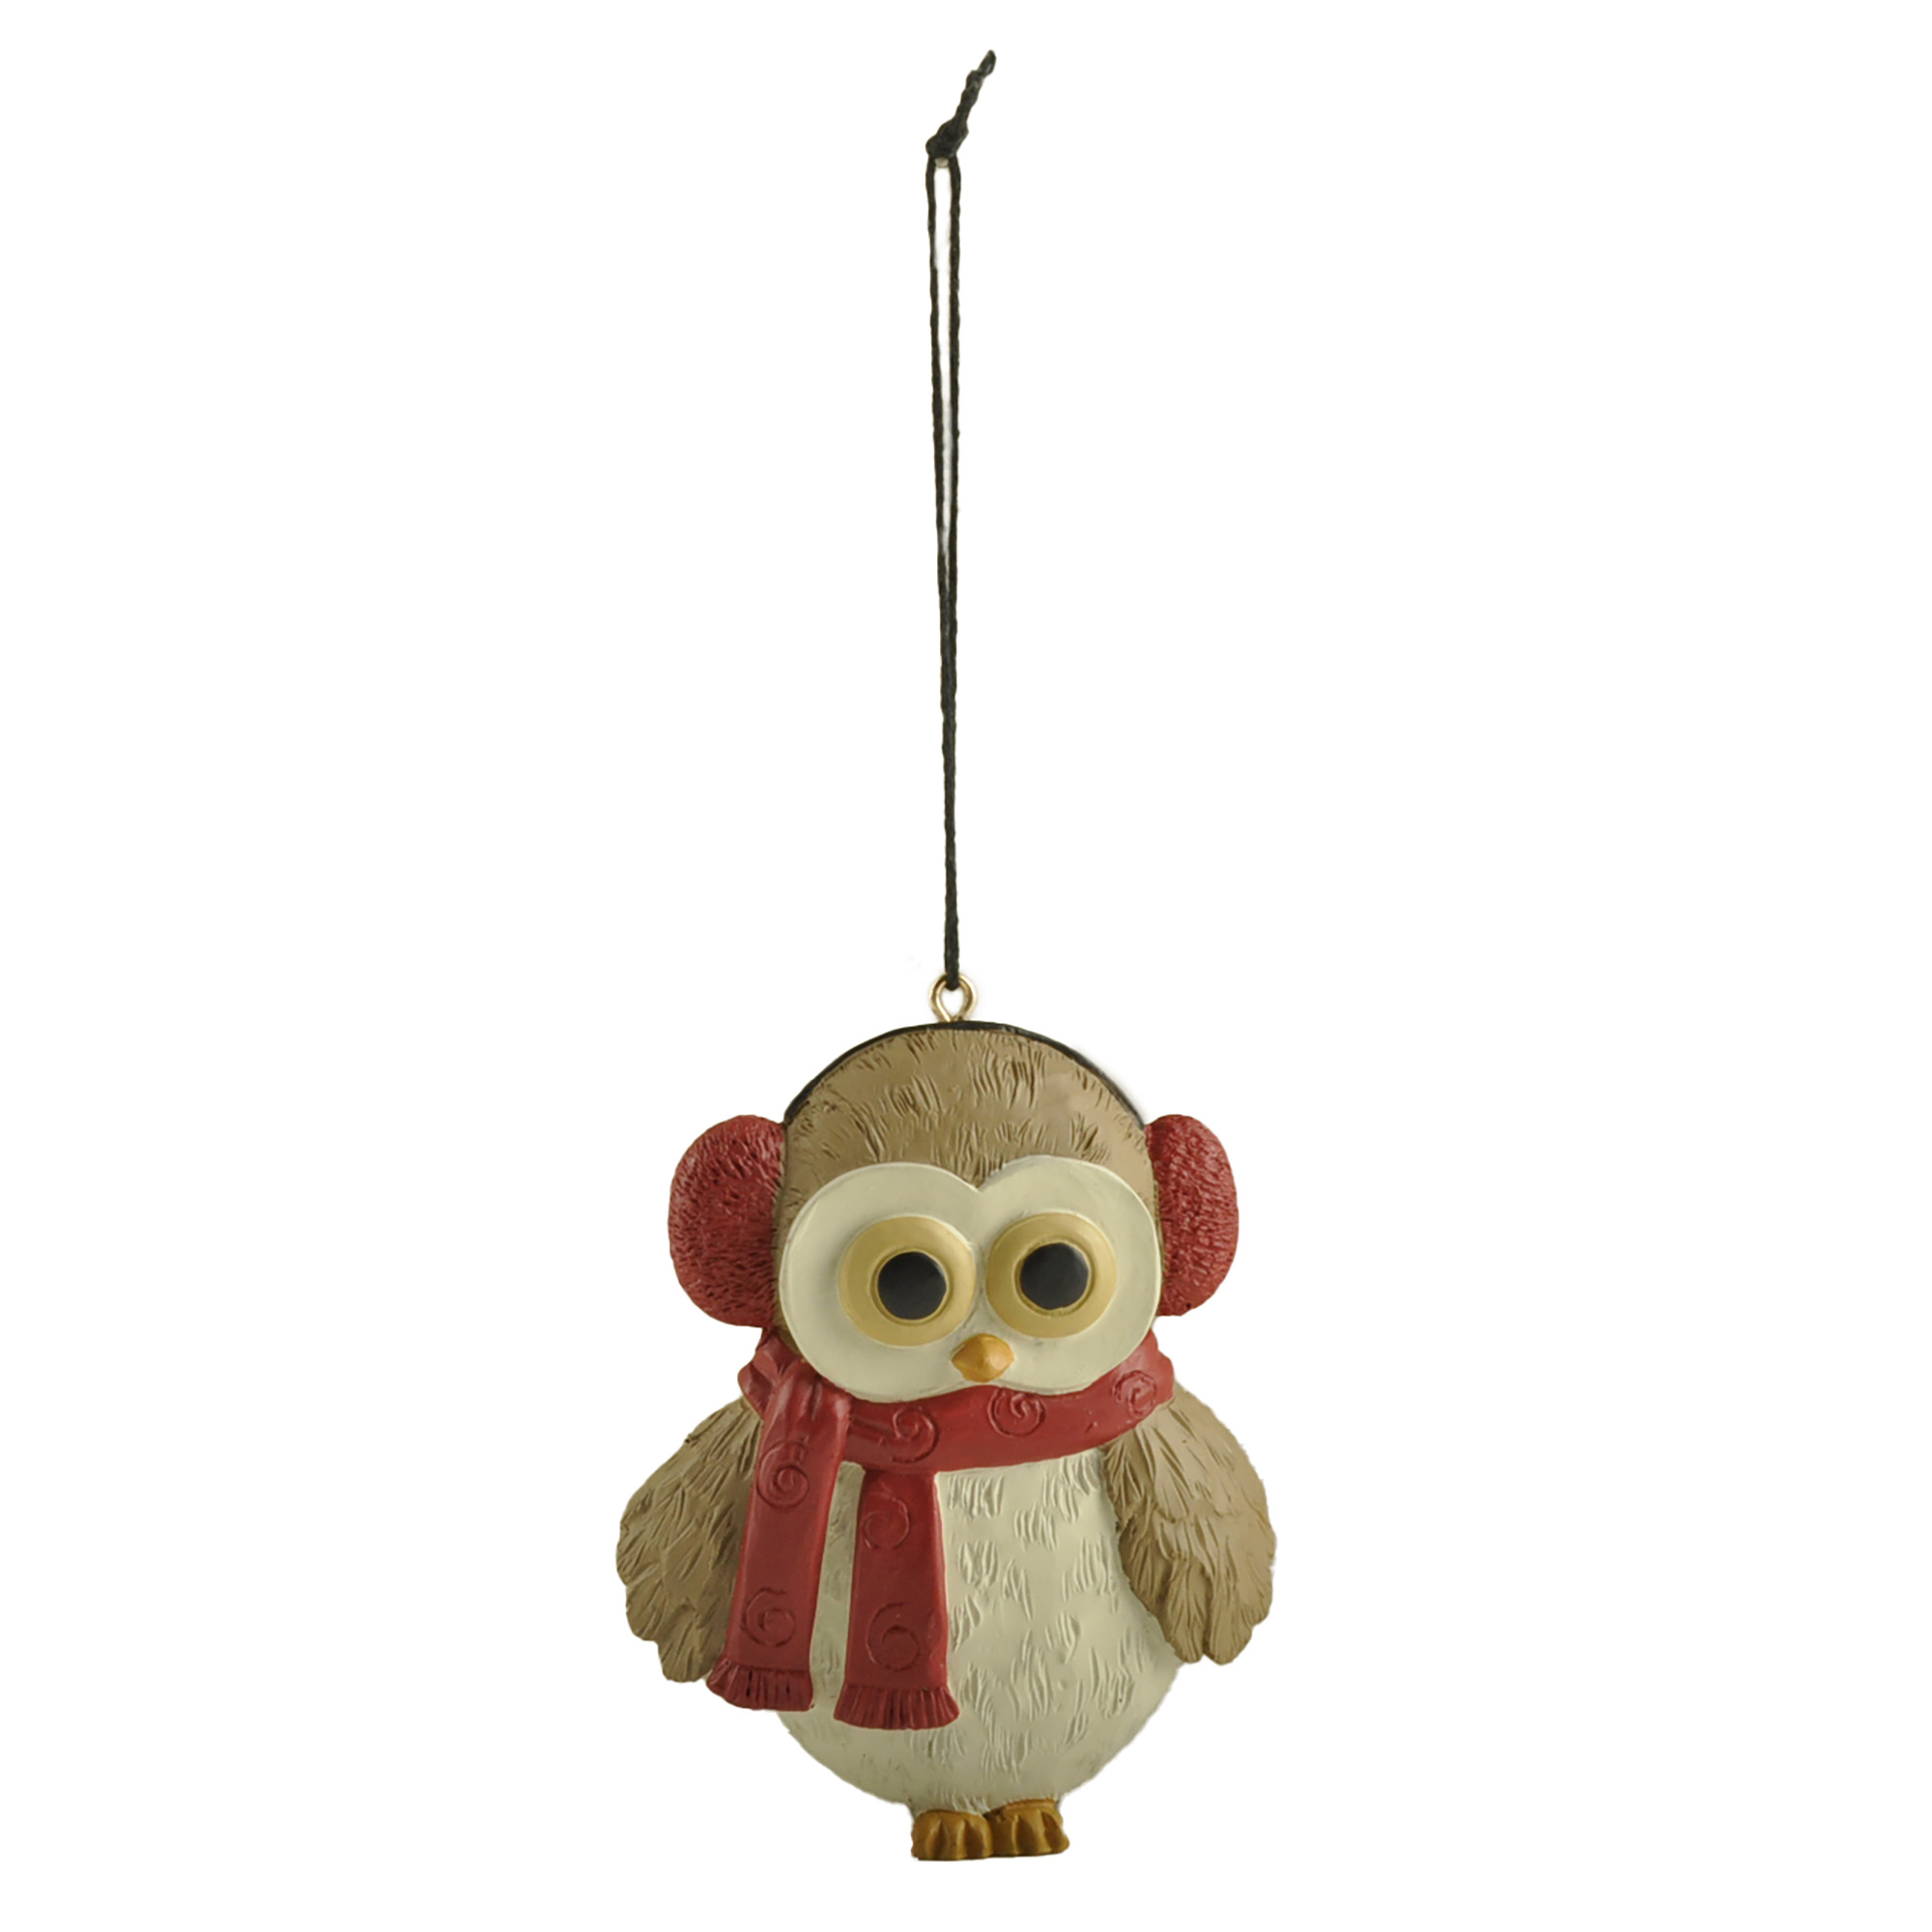 Adorable Resin Owl Hanging Ornament with Scarf and Earmuffs for Festive Christmas Tree Decoration 238-52142